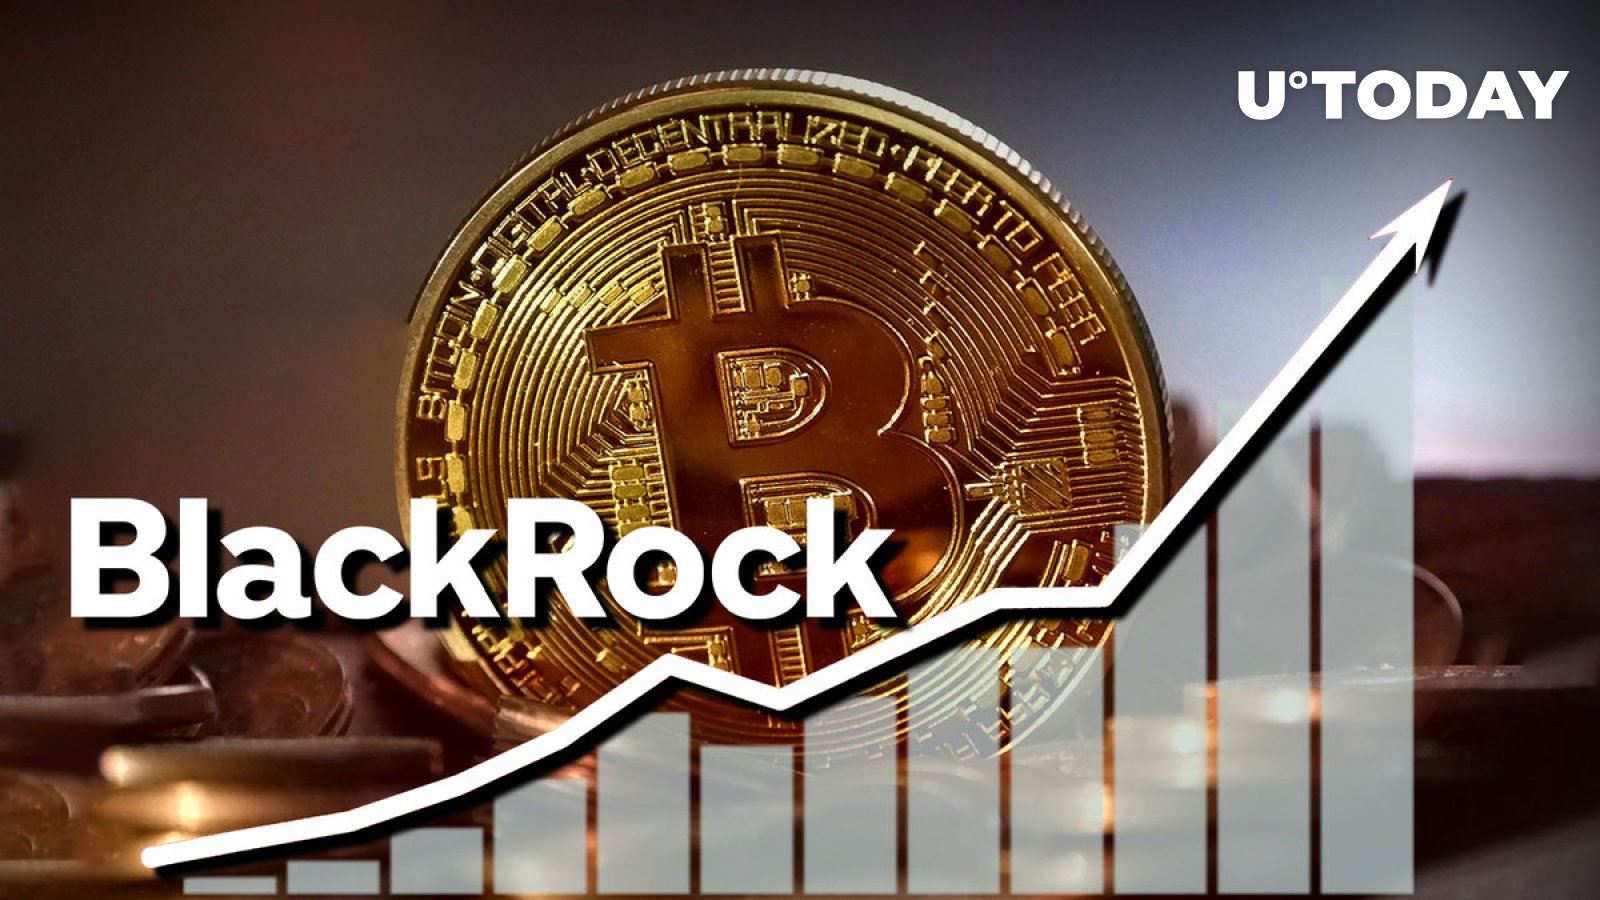 btc-holdings-of-funds-see-strong-uptick-thanks-to-blackrock